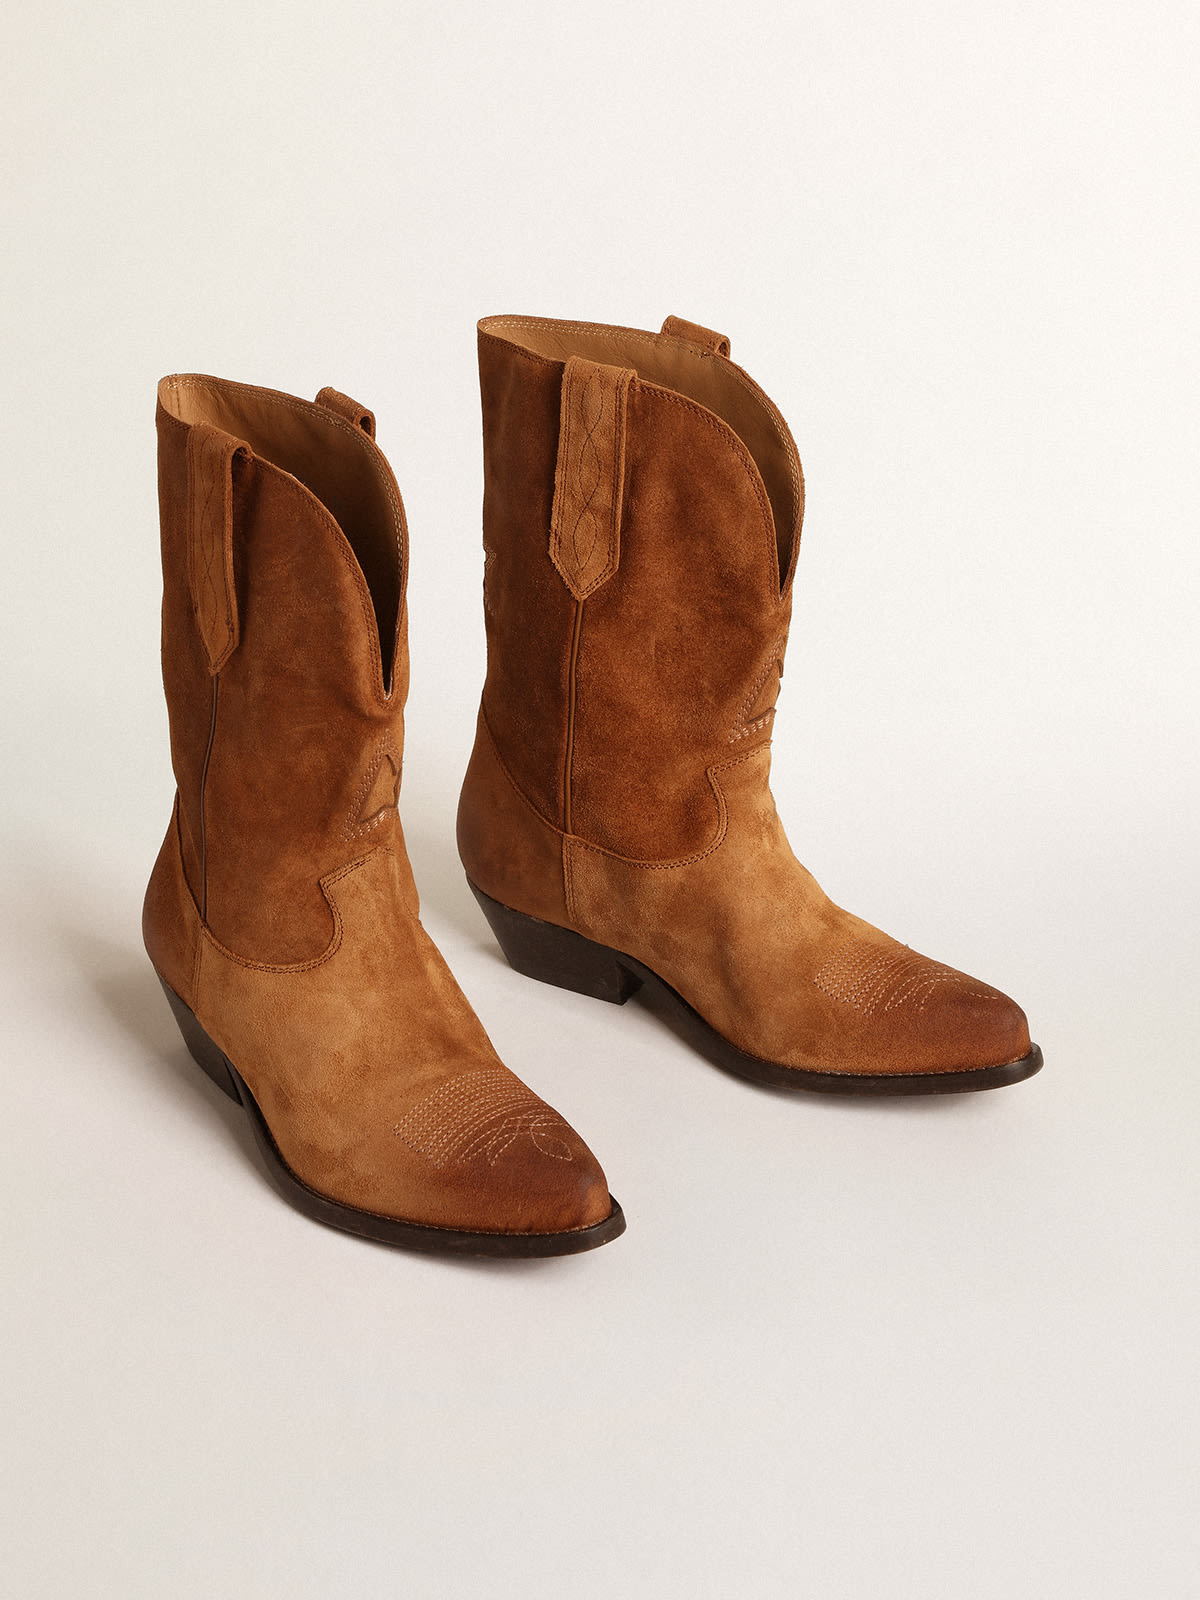 Golden Goose - Low Wish Star boots in cognac-colored suede with inlay star in 